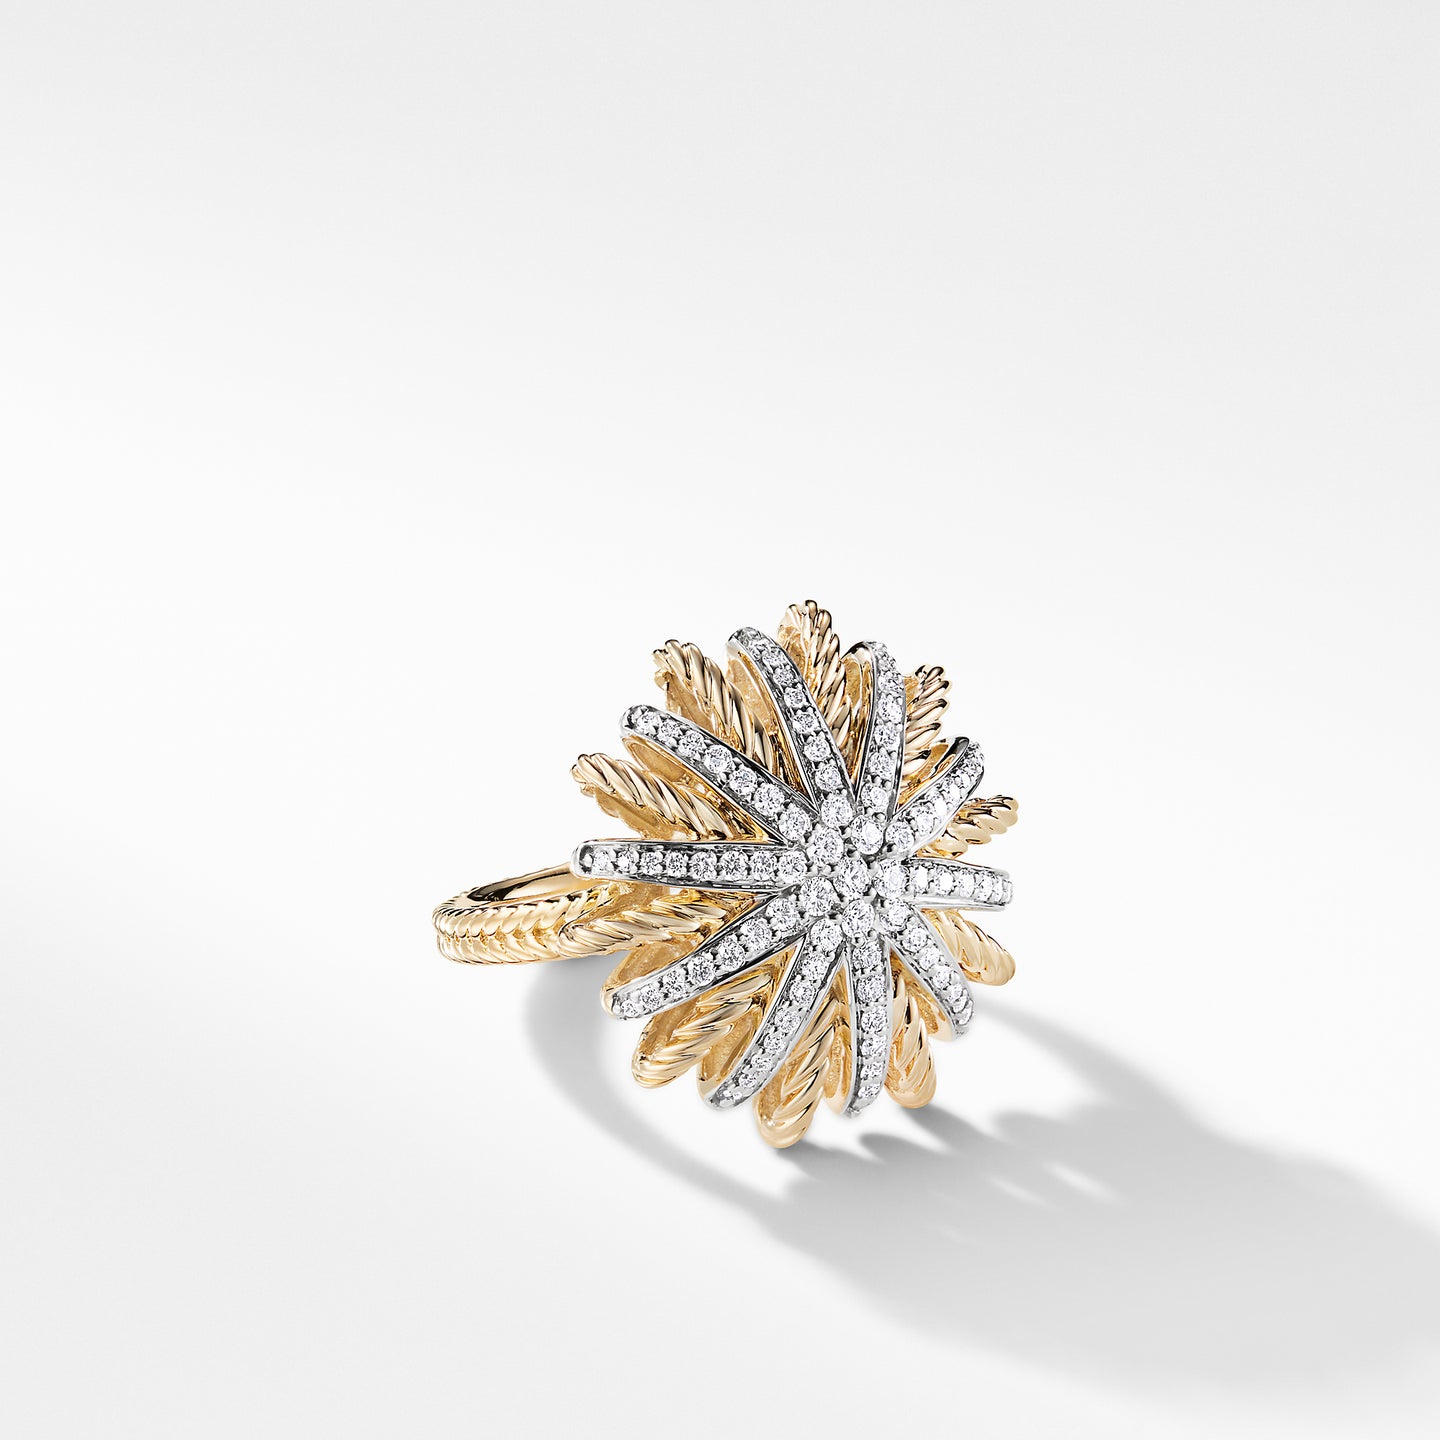 Starburst Ring with Diamonds in Gold, Size 8